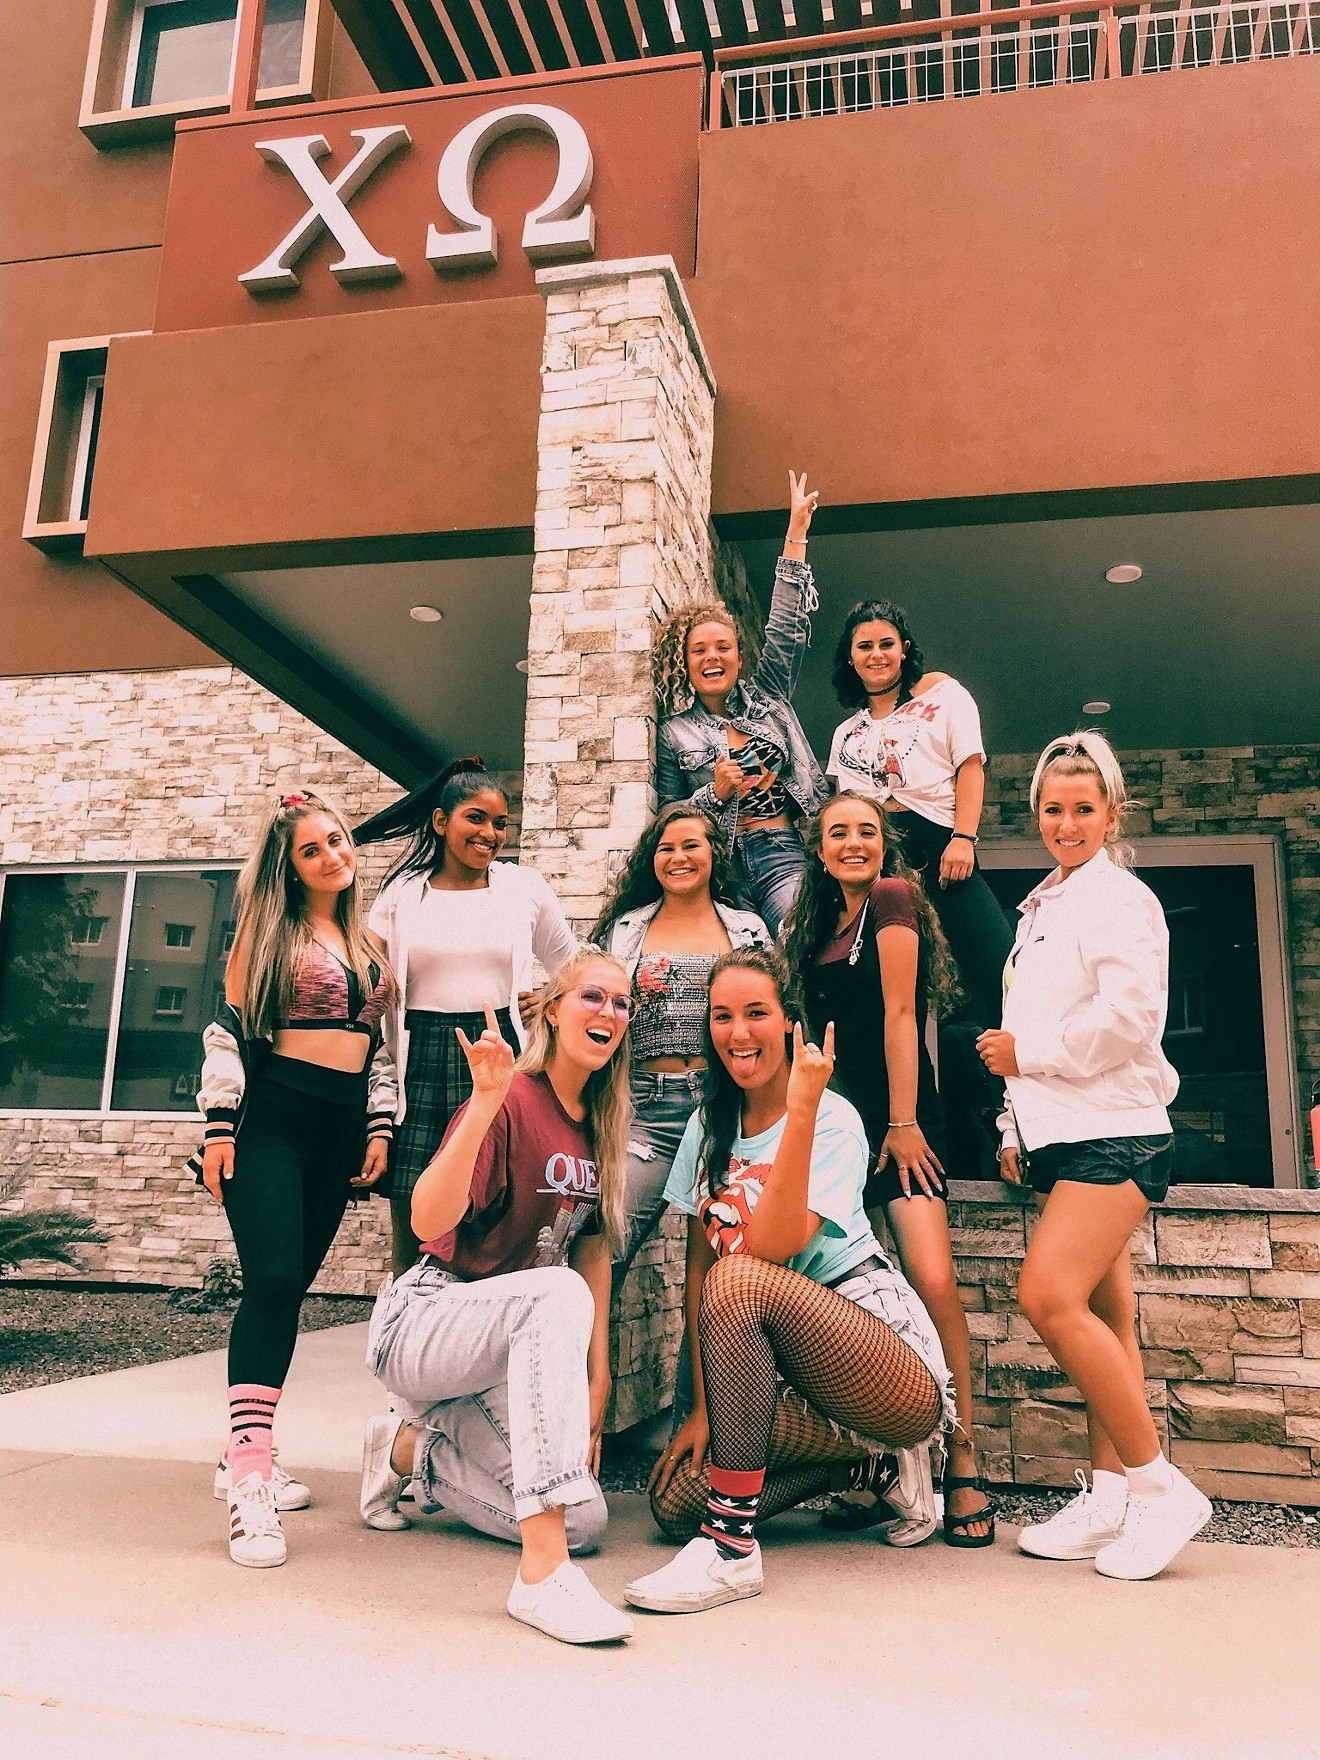 Members of ASU's chapter of Chi Omega sorority pose at the newly constructed Greek Leadership Village.